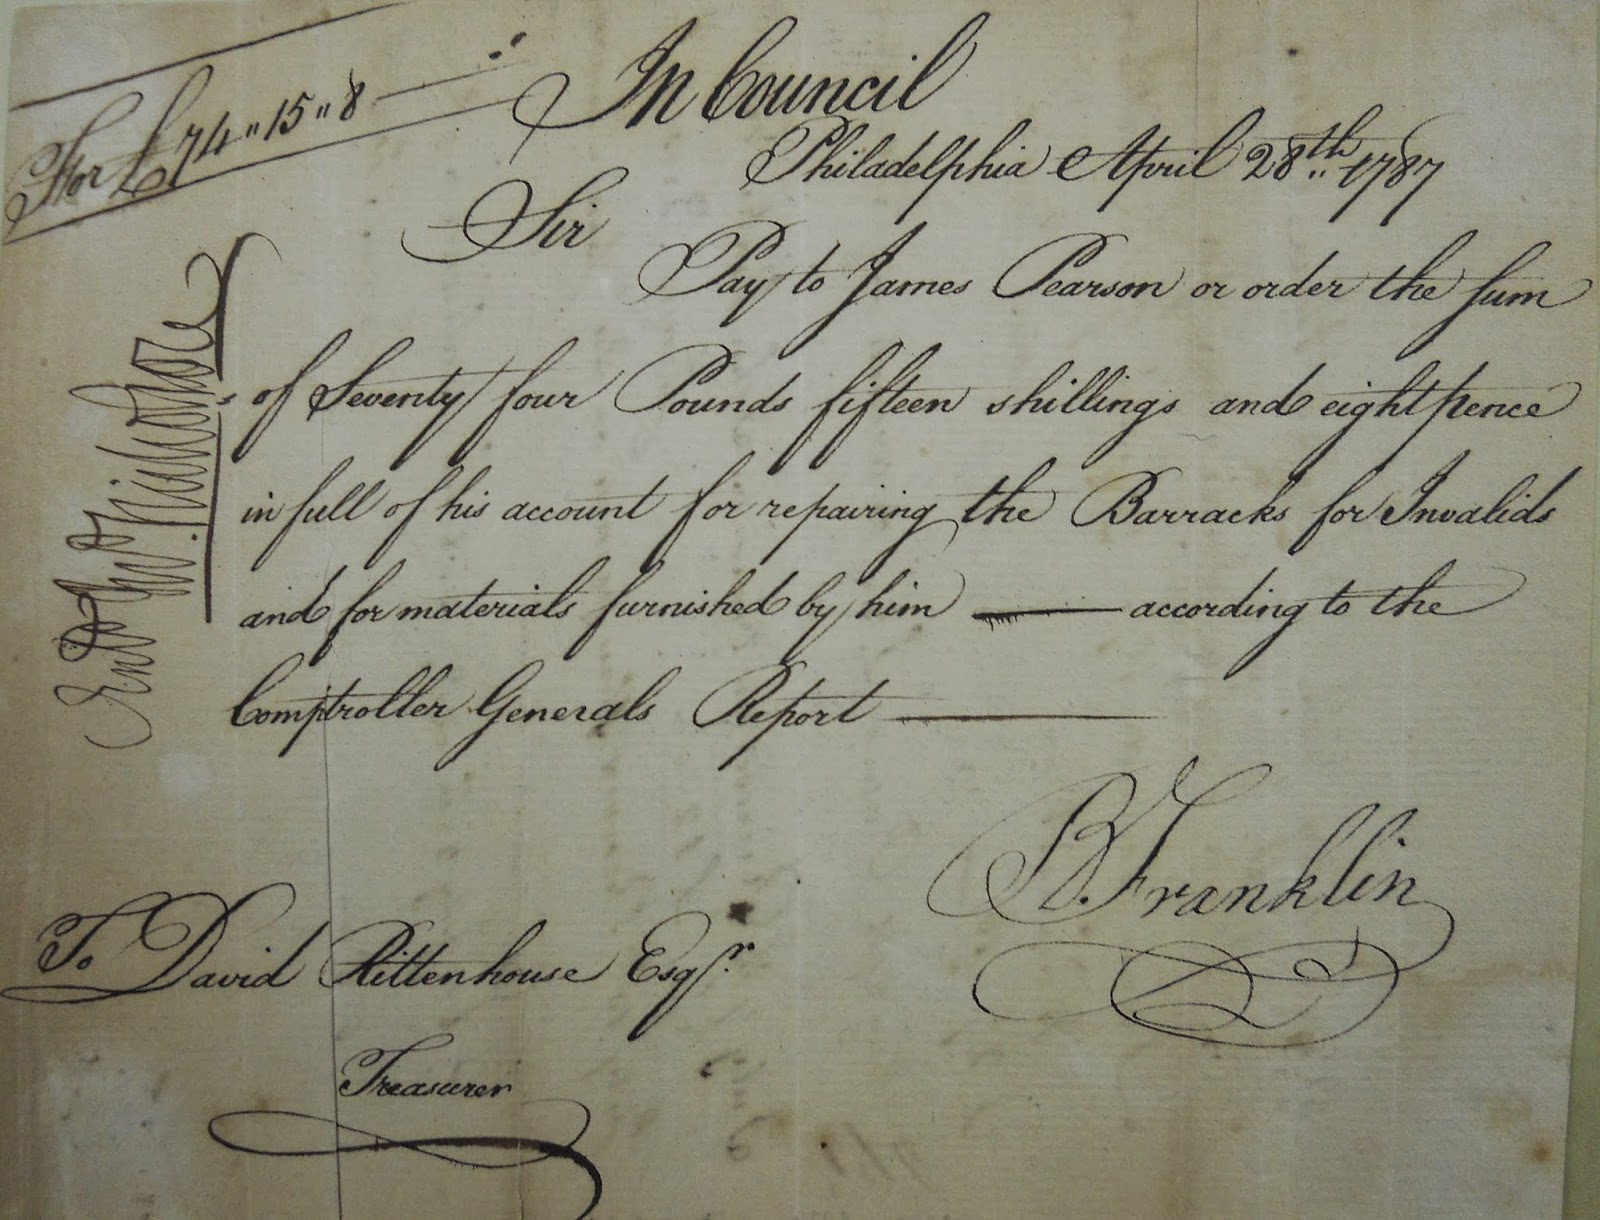 Document signed by Benjamin Franklin and David Rittenhouse, Esq. requesting payment to James Pearson for repariing the barracks for invalids.